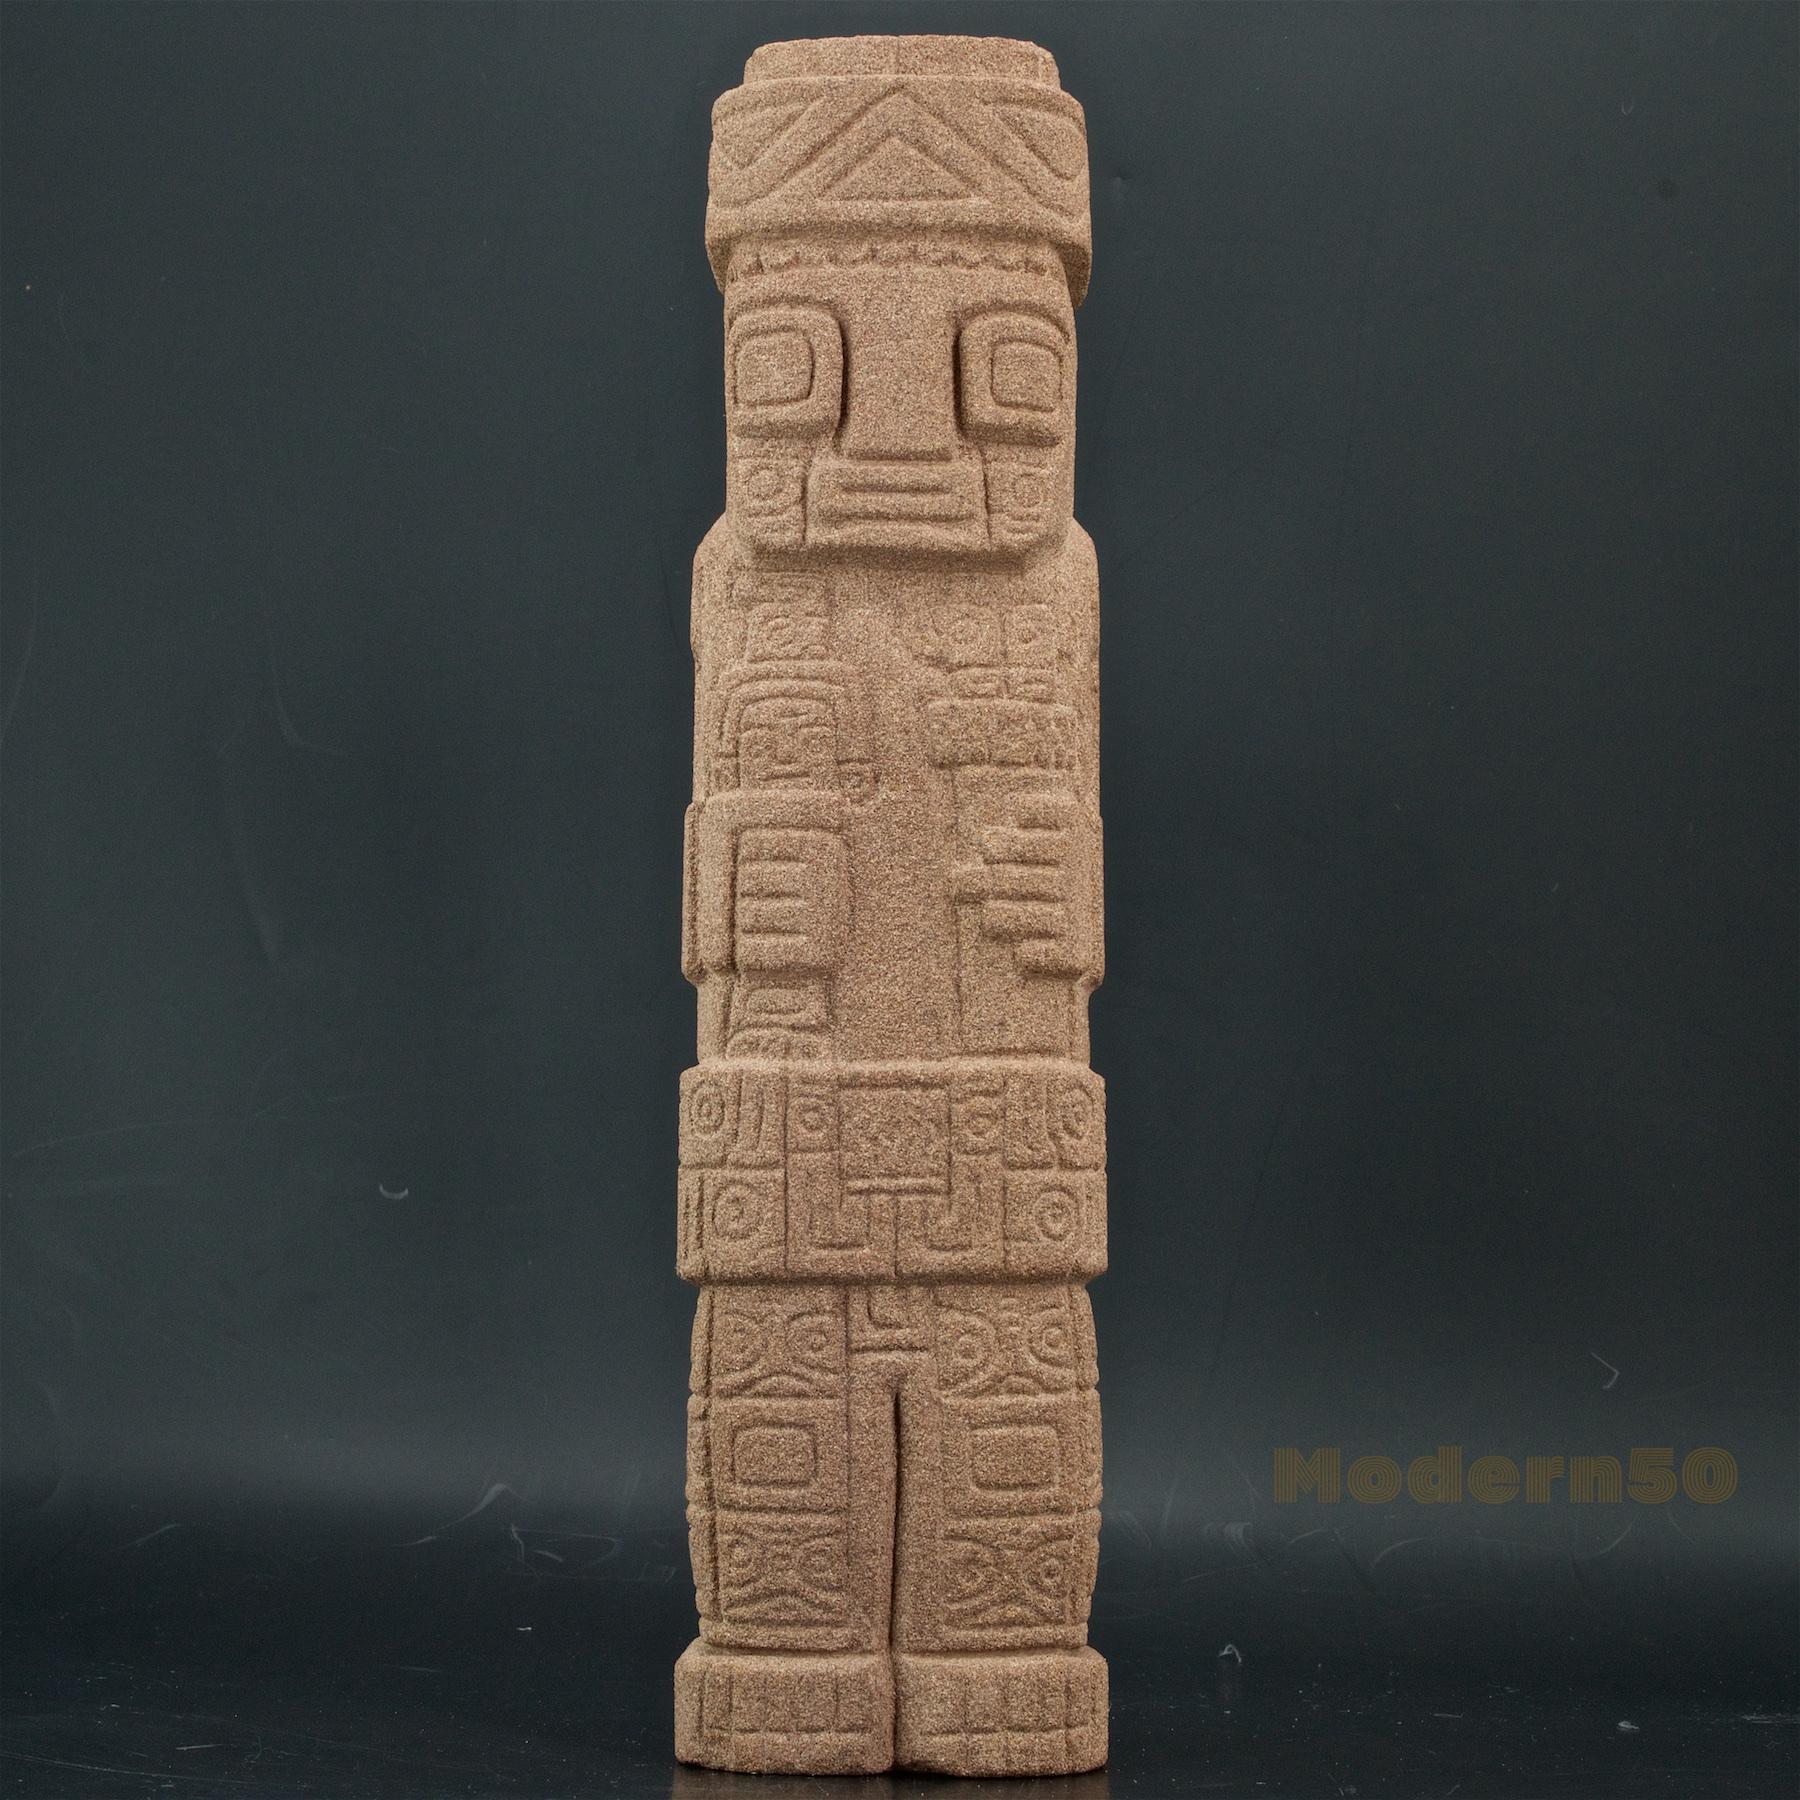 Cast with a sandy type material to mimic the volcanic stone of the original toltec antiquities. No markings or makers marks. 

   